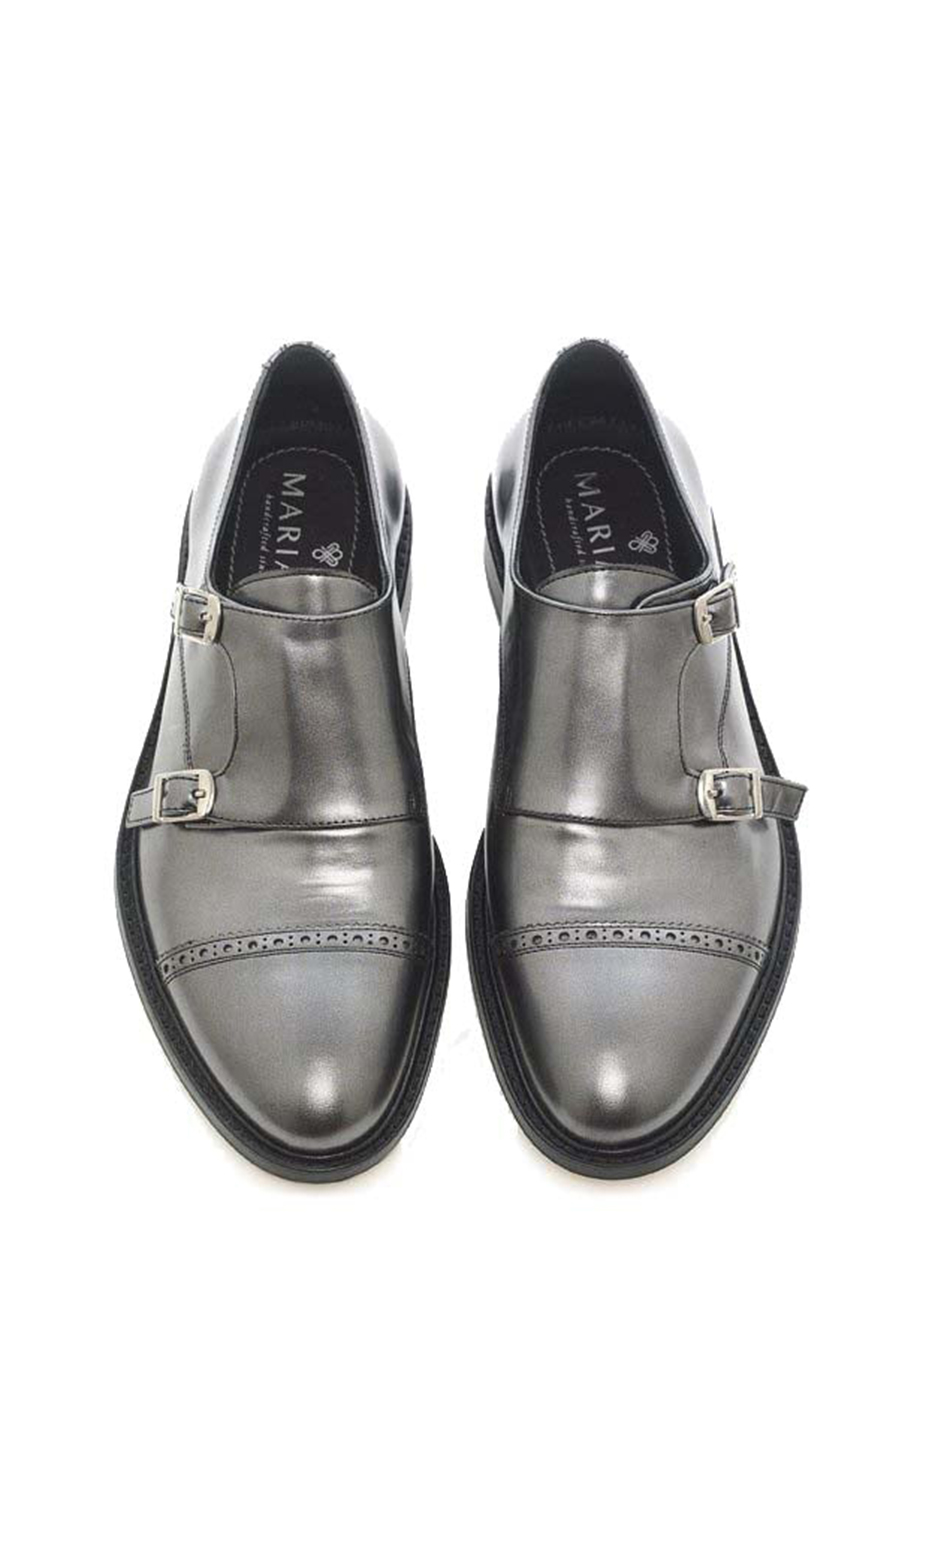 silver monk shoes